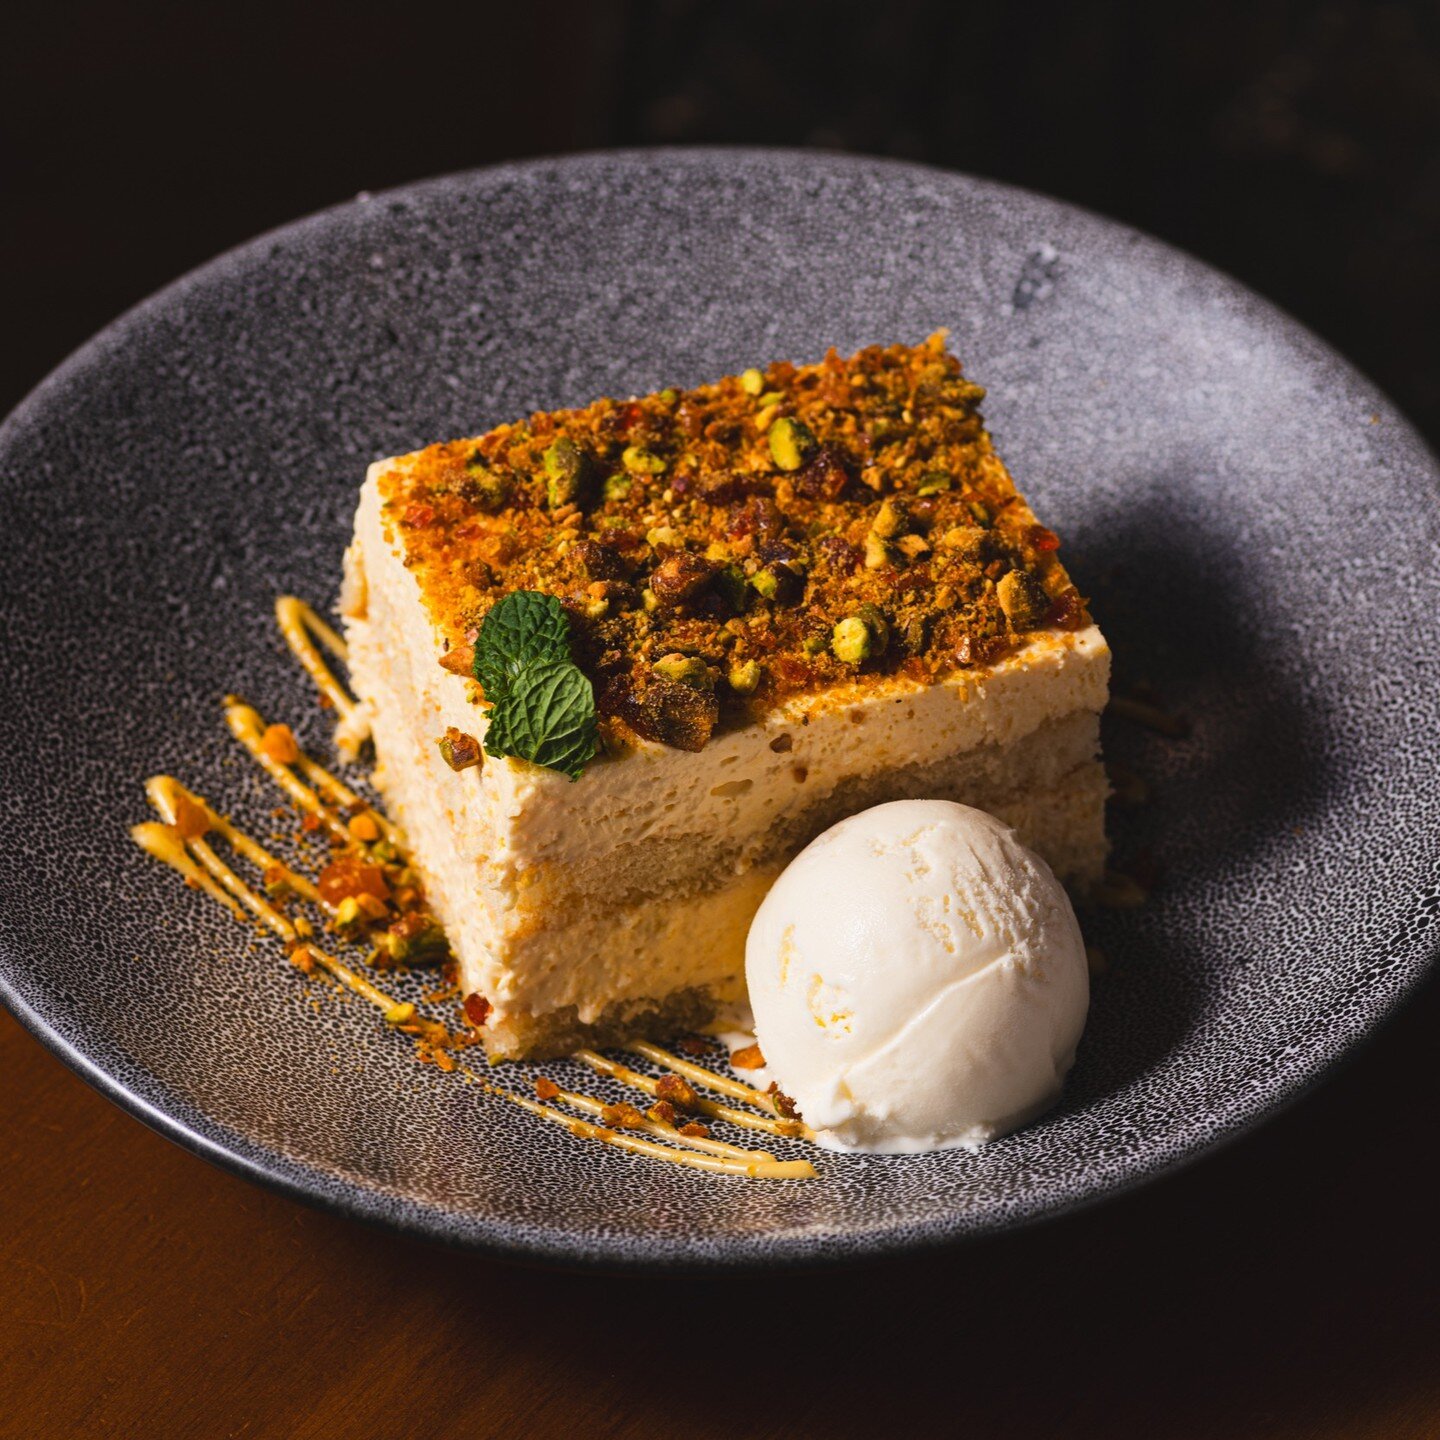 @tuttobenechristchurch 

!!Limoncello Tiramisu!!

I was sorely tempted to try this stunning look dish when shooting some menu items with the team at Tutto Bene this week...

But I was strong!...

And... quite full from trying a host of other dishes i